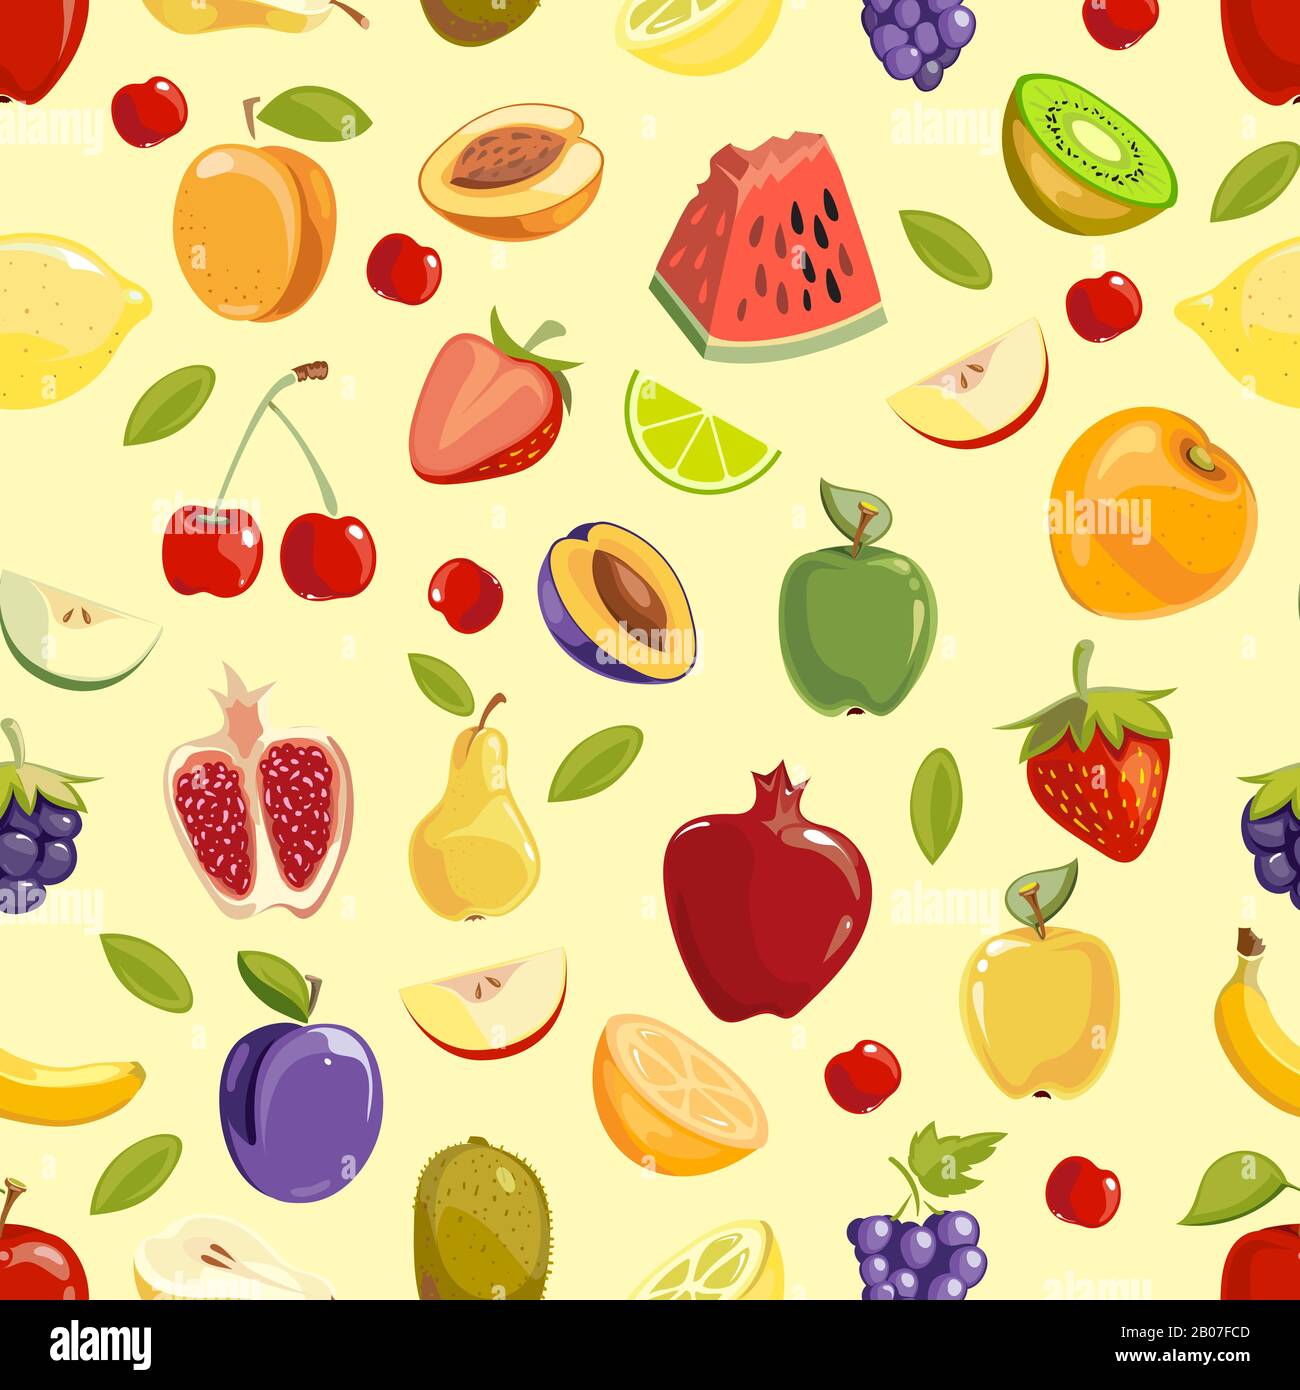 Miscellaneous vector colored fruits seamless pattern background. Vector illustration Stock Vector